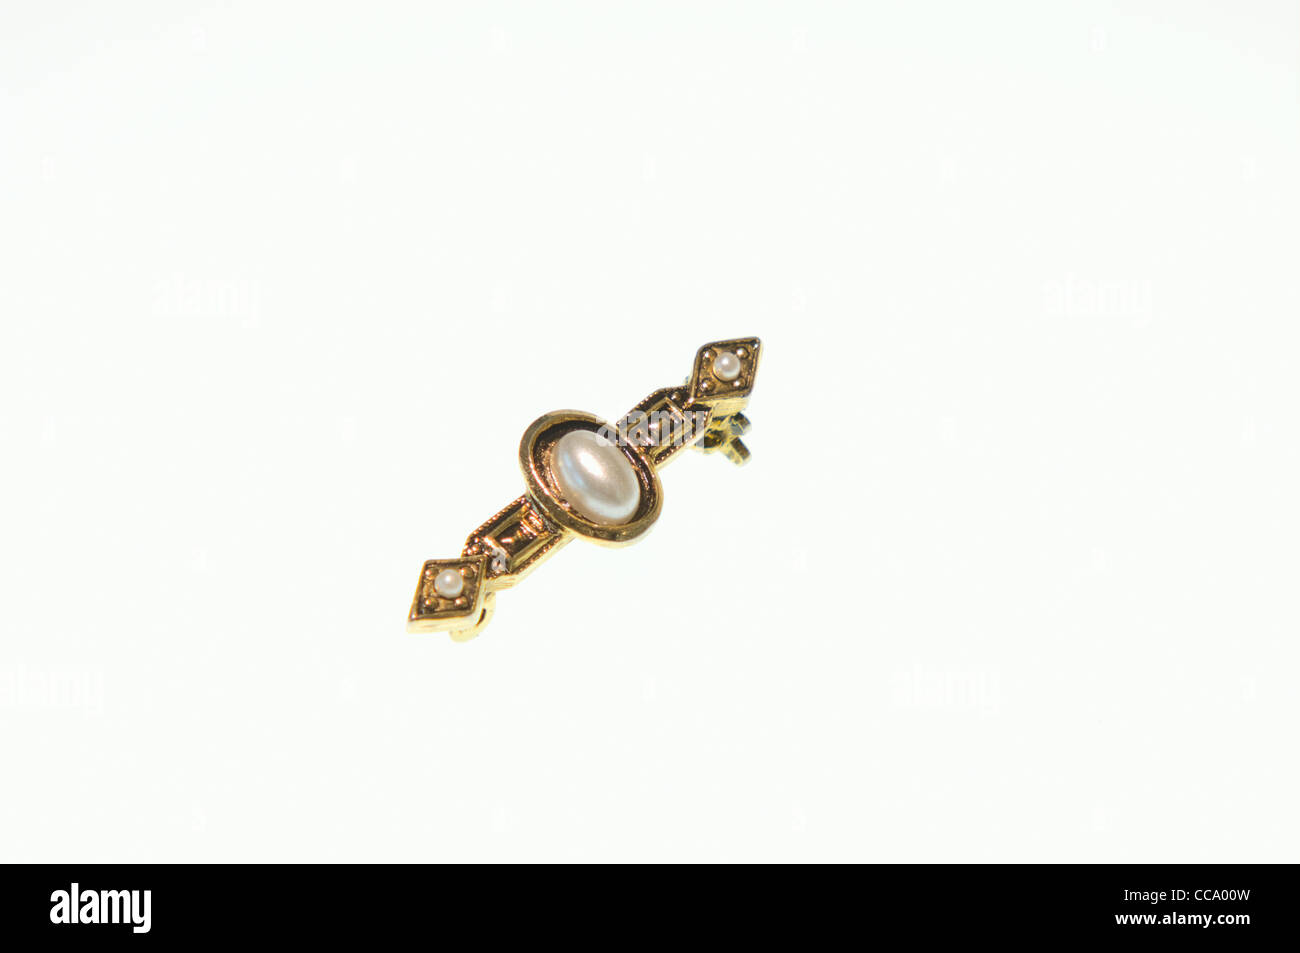 Gold pin decorated with pearls Stock Photo